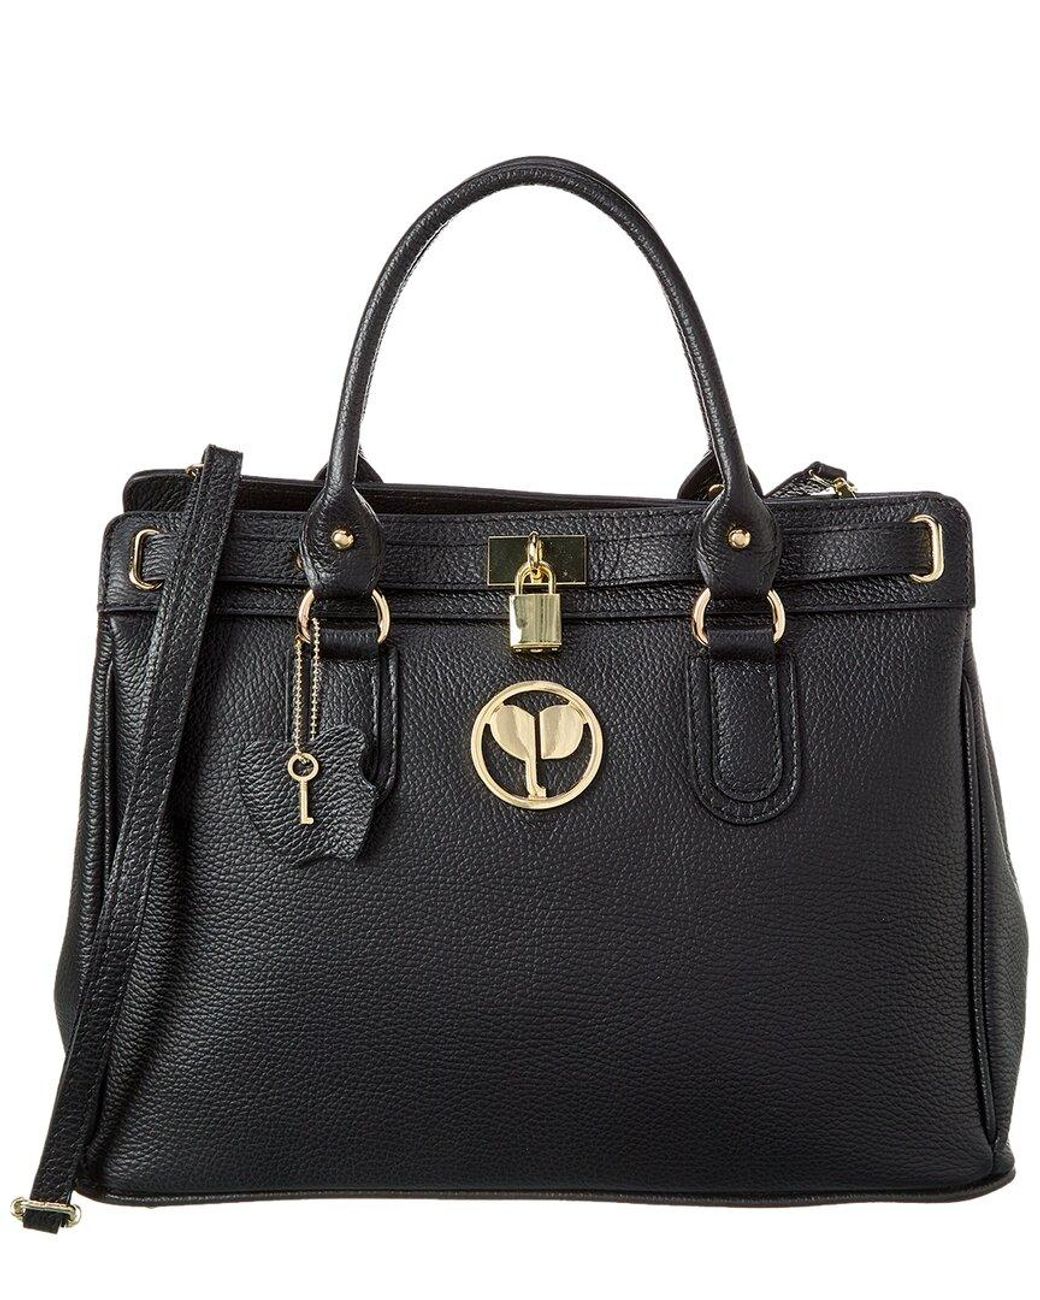 Persaman New York Gemma Leather Tote in Black | Lyst